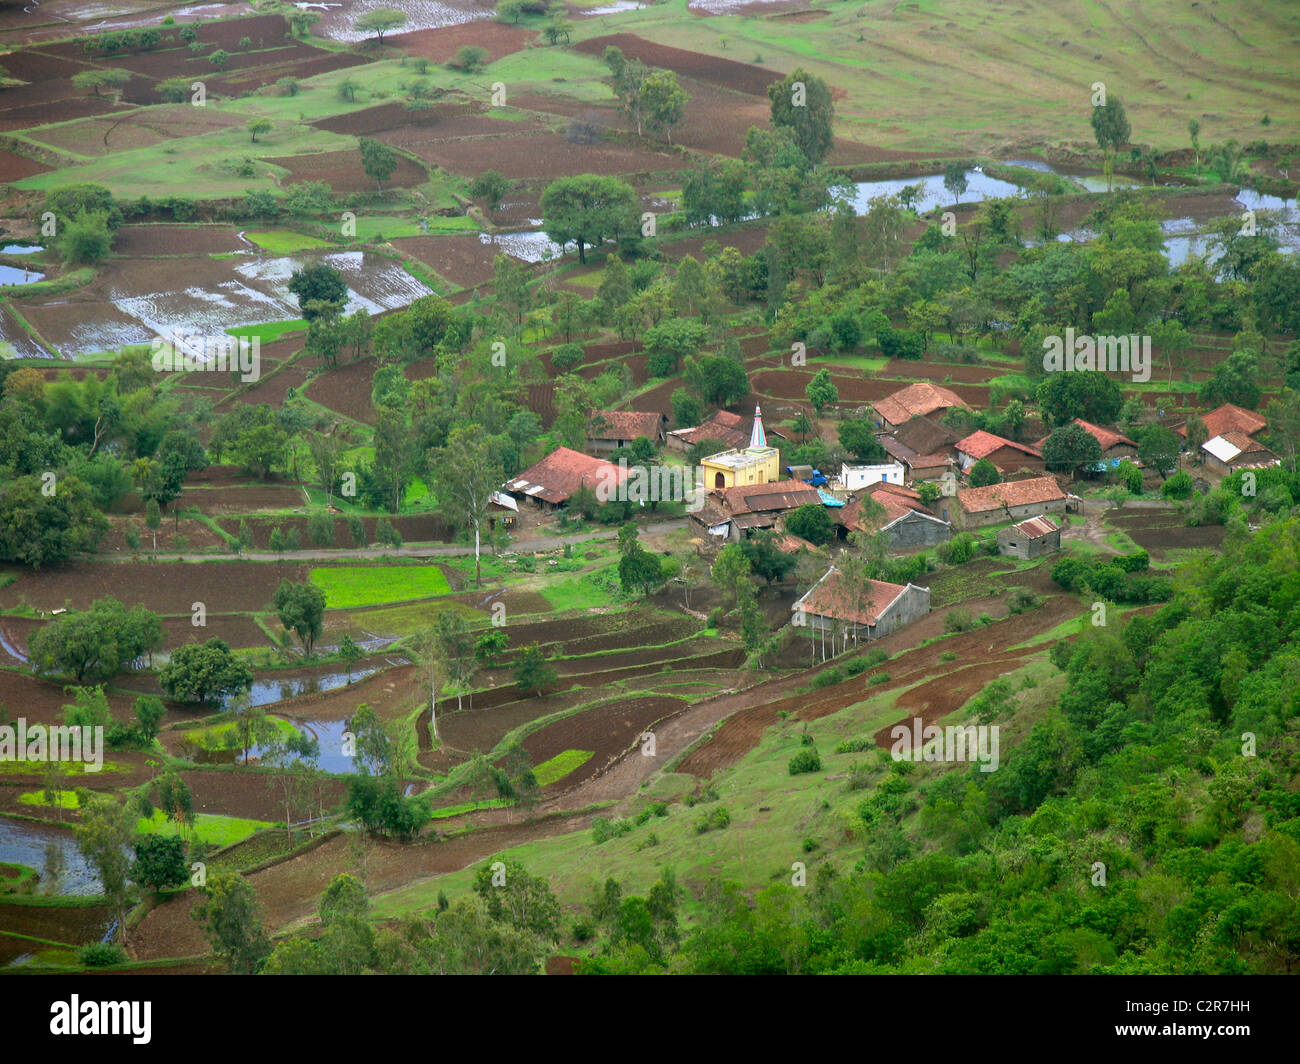 Top view of village and agricultural land from sinhangad fort. Maharashtra, India Stock Photo